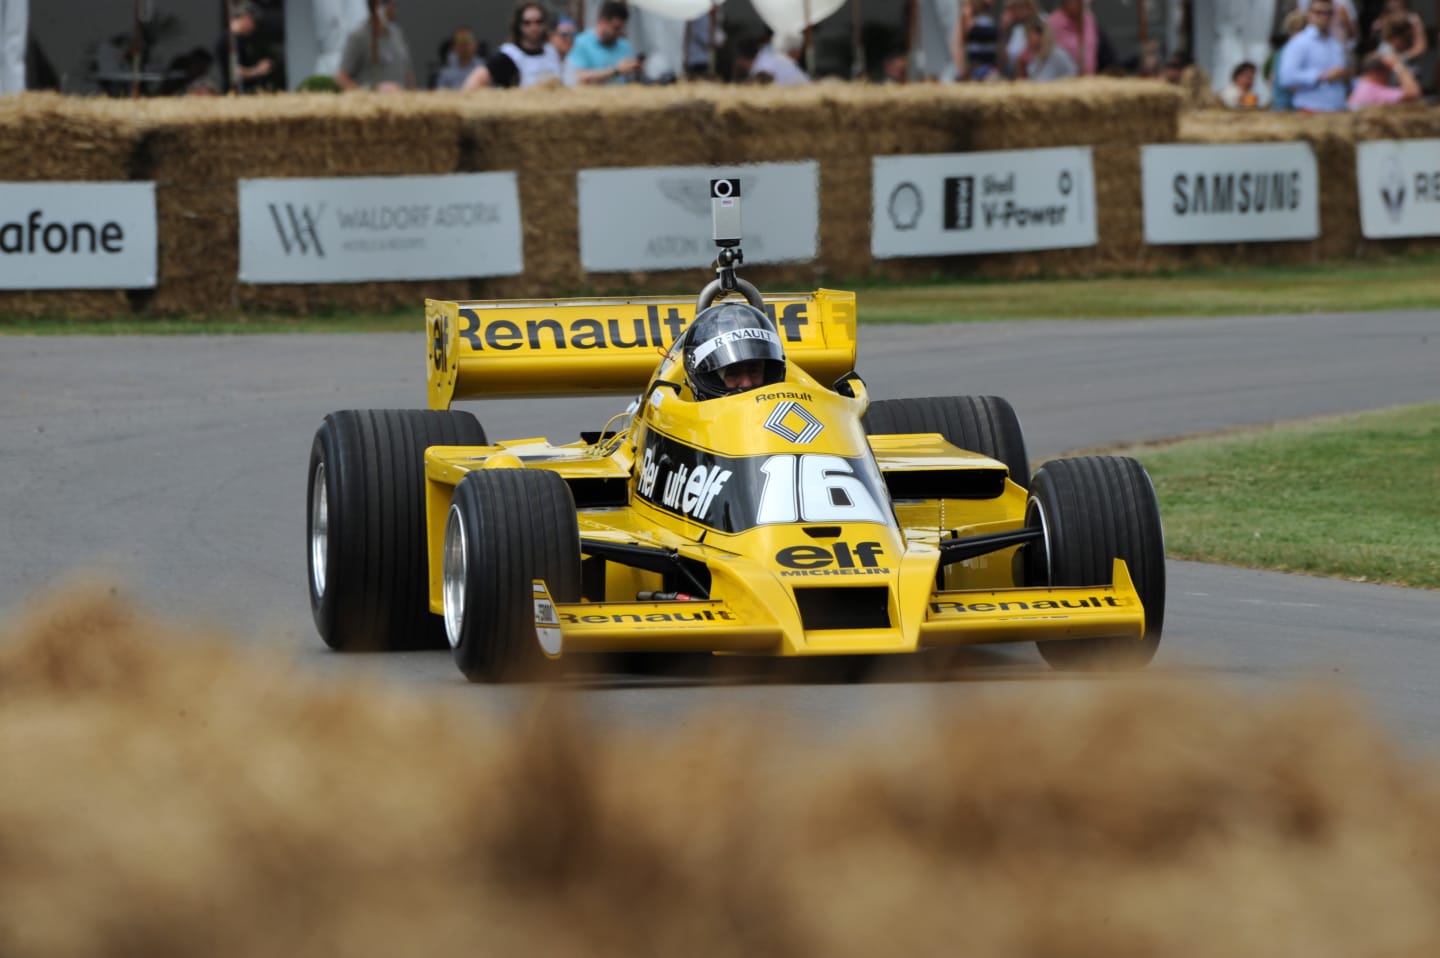 www.sutton-images.com Renault RS01 at Goodwood Festival of Speed, Goodwood, England, 30 June - 2 July 2017. © Sutton Images